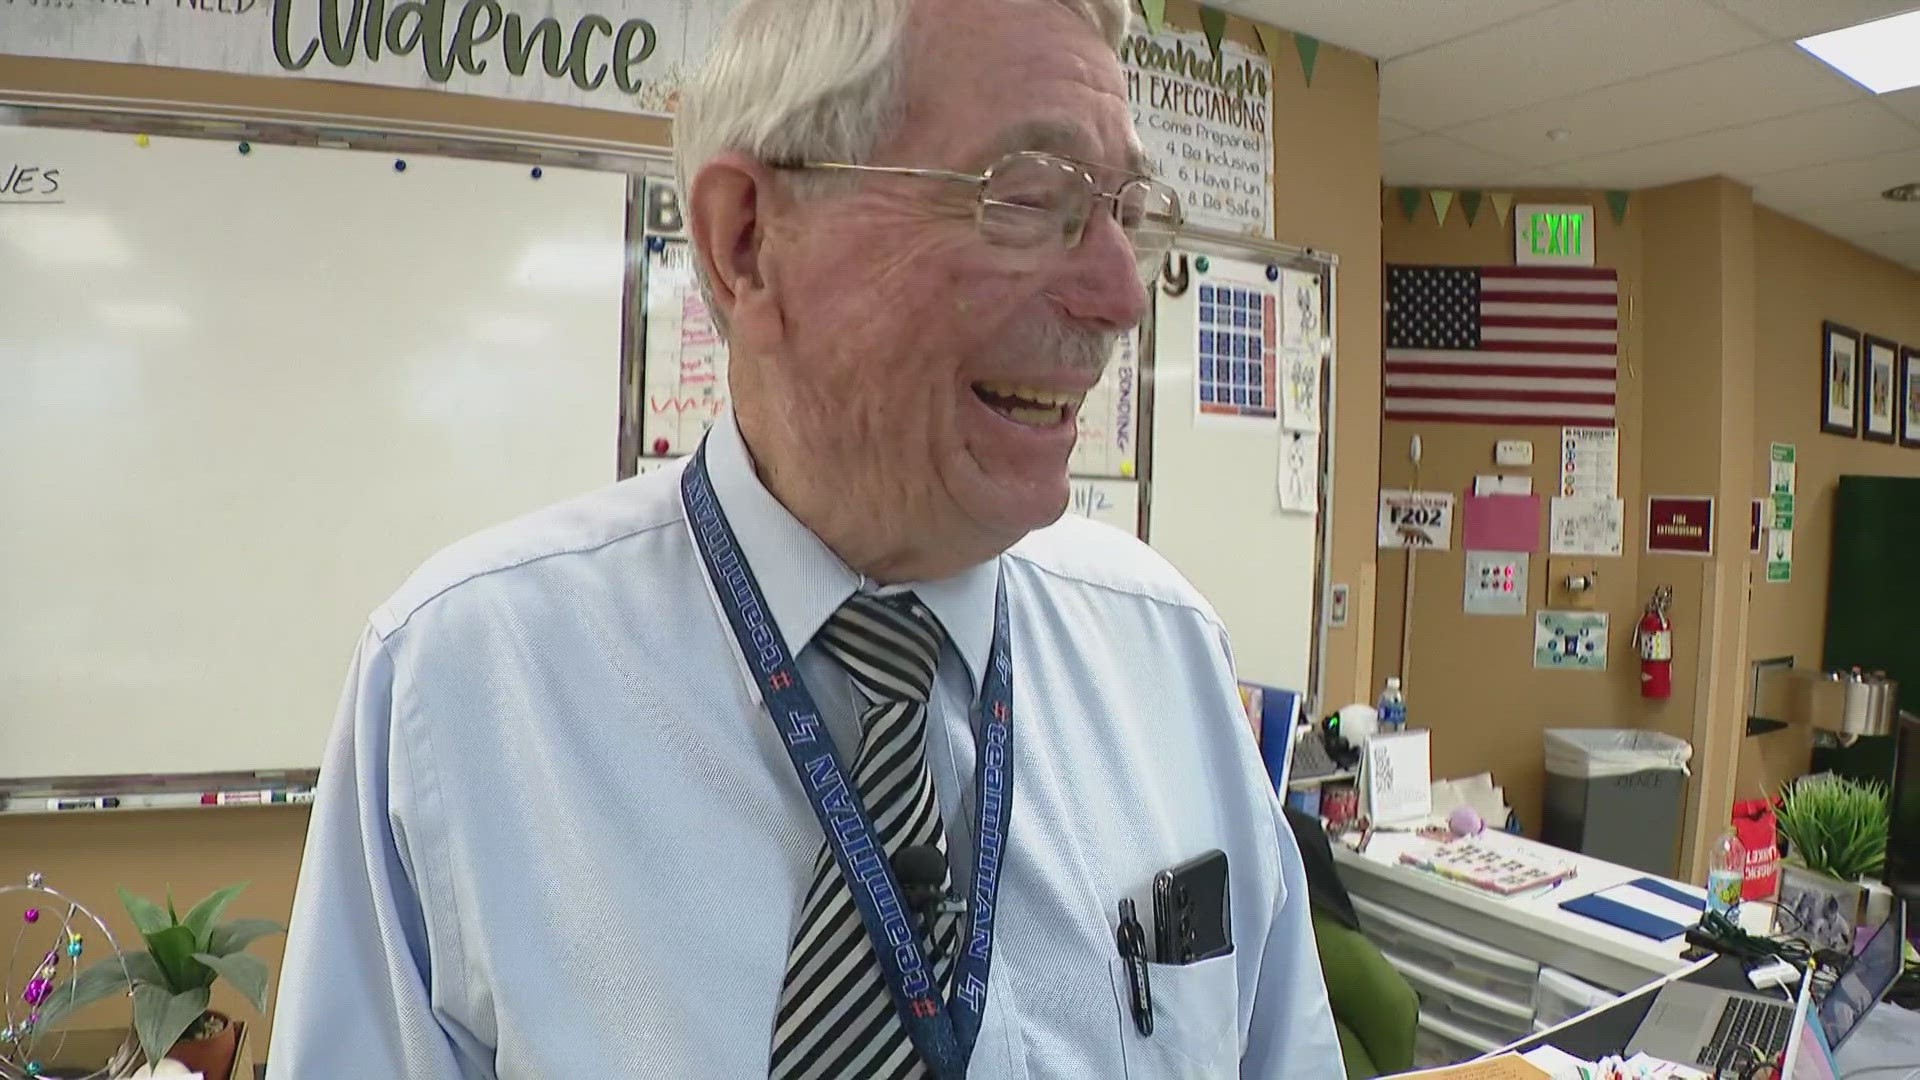 Former NASA engineer Tom Graves, who worked on Apollo and space shuttle missions, is a substitute teacher at Legend High School in Douglas County, Colorado.